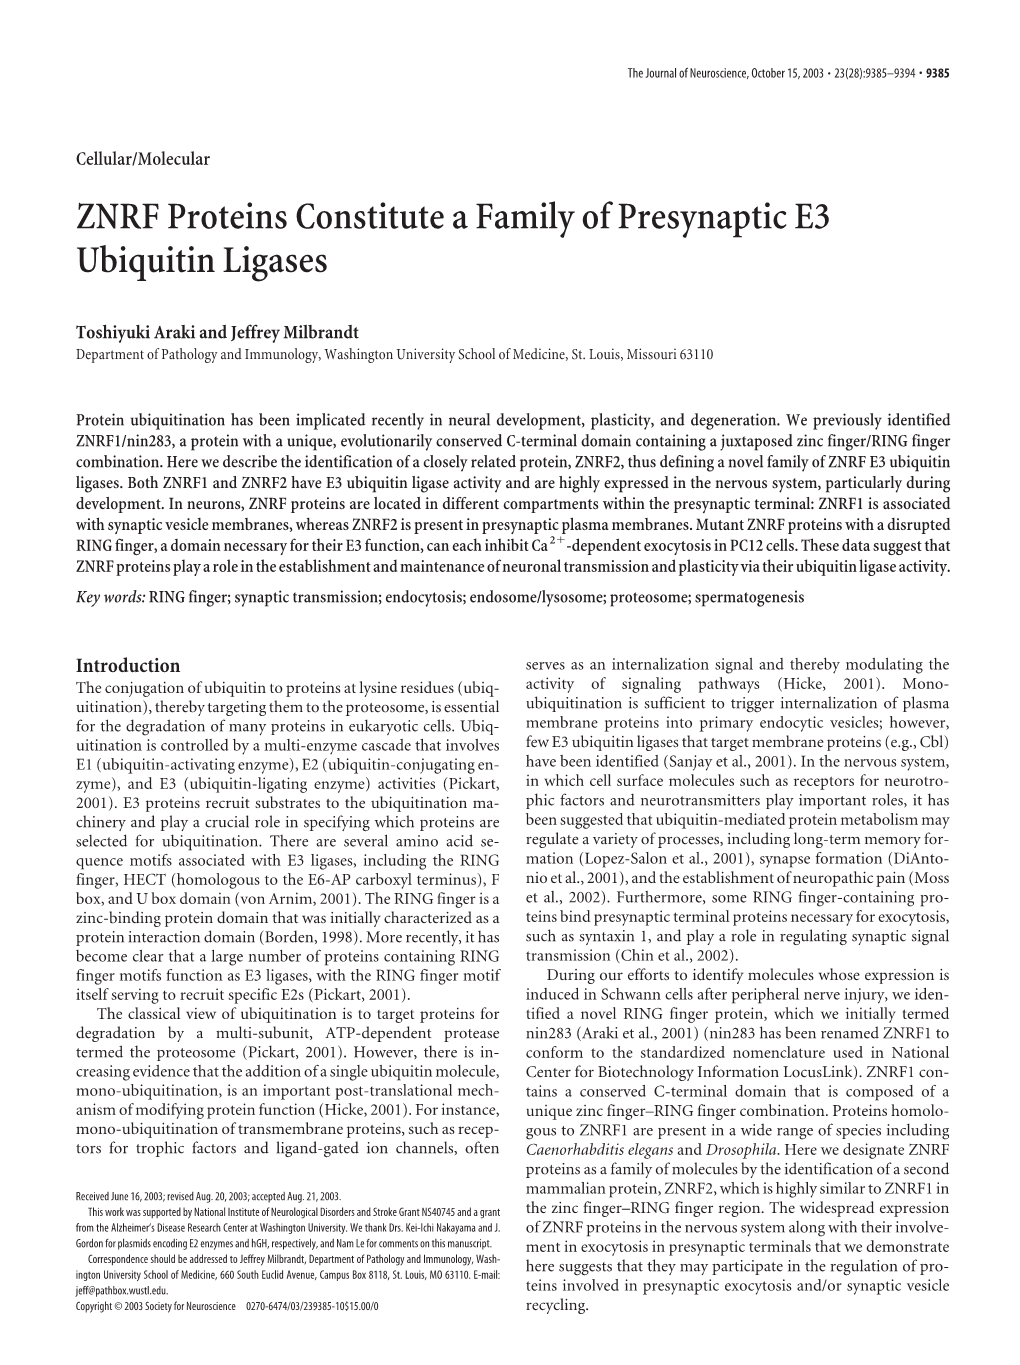 ZNRF Proteins Constitute a Family of Presynaptic E3 Ubiquitin Ligases